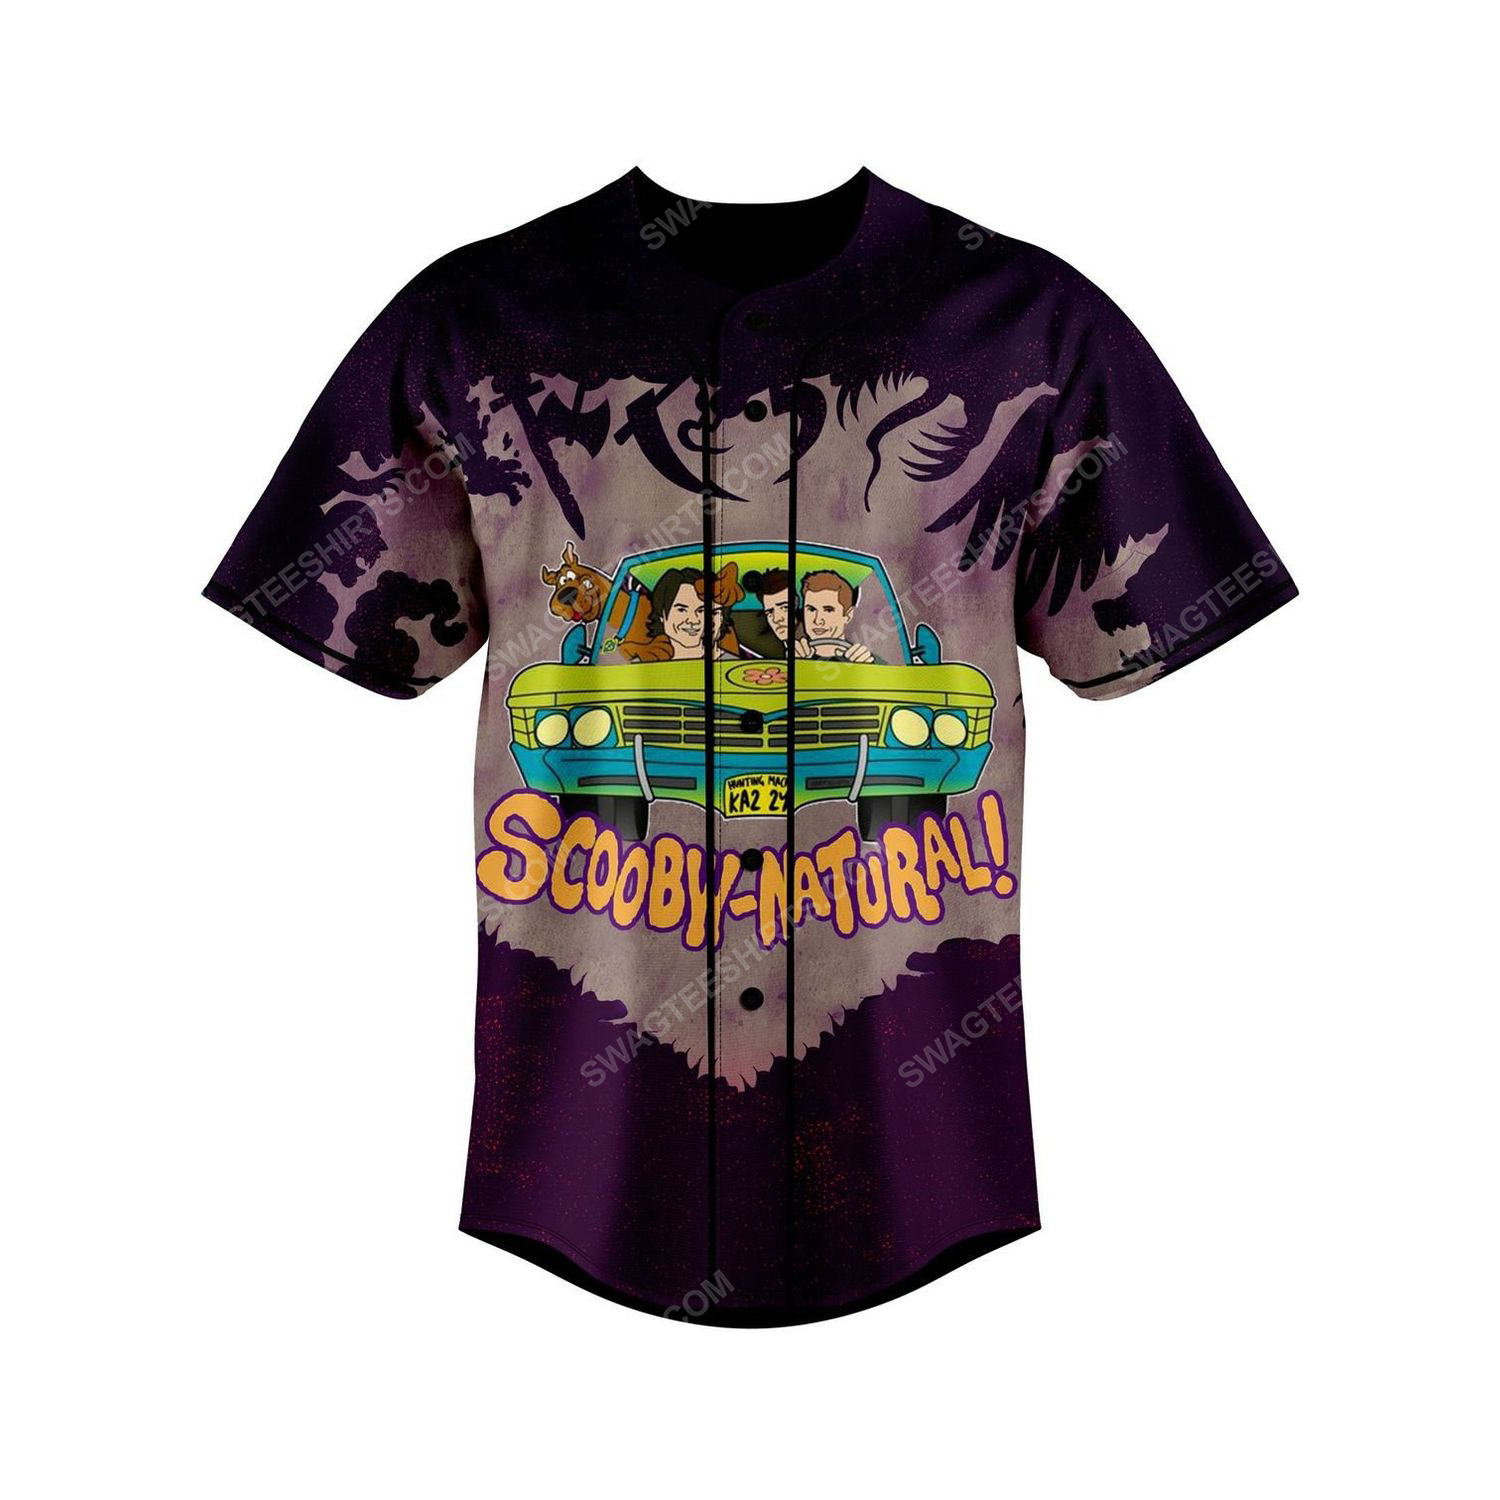 Scooby doo natural all over print baseball jersey 2 - Copy